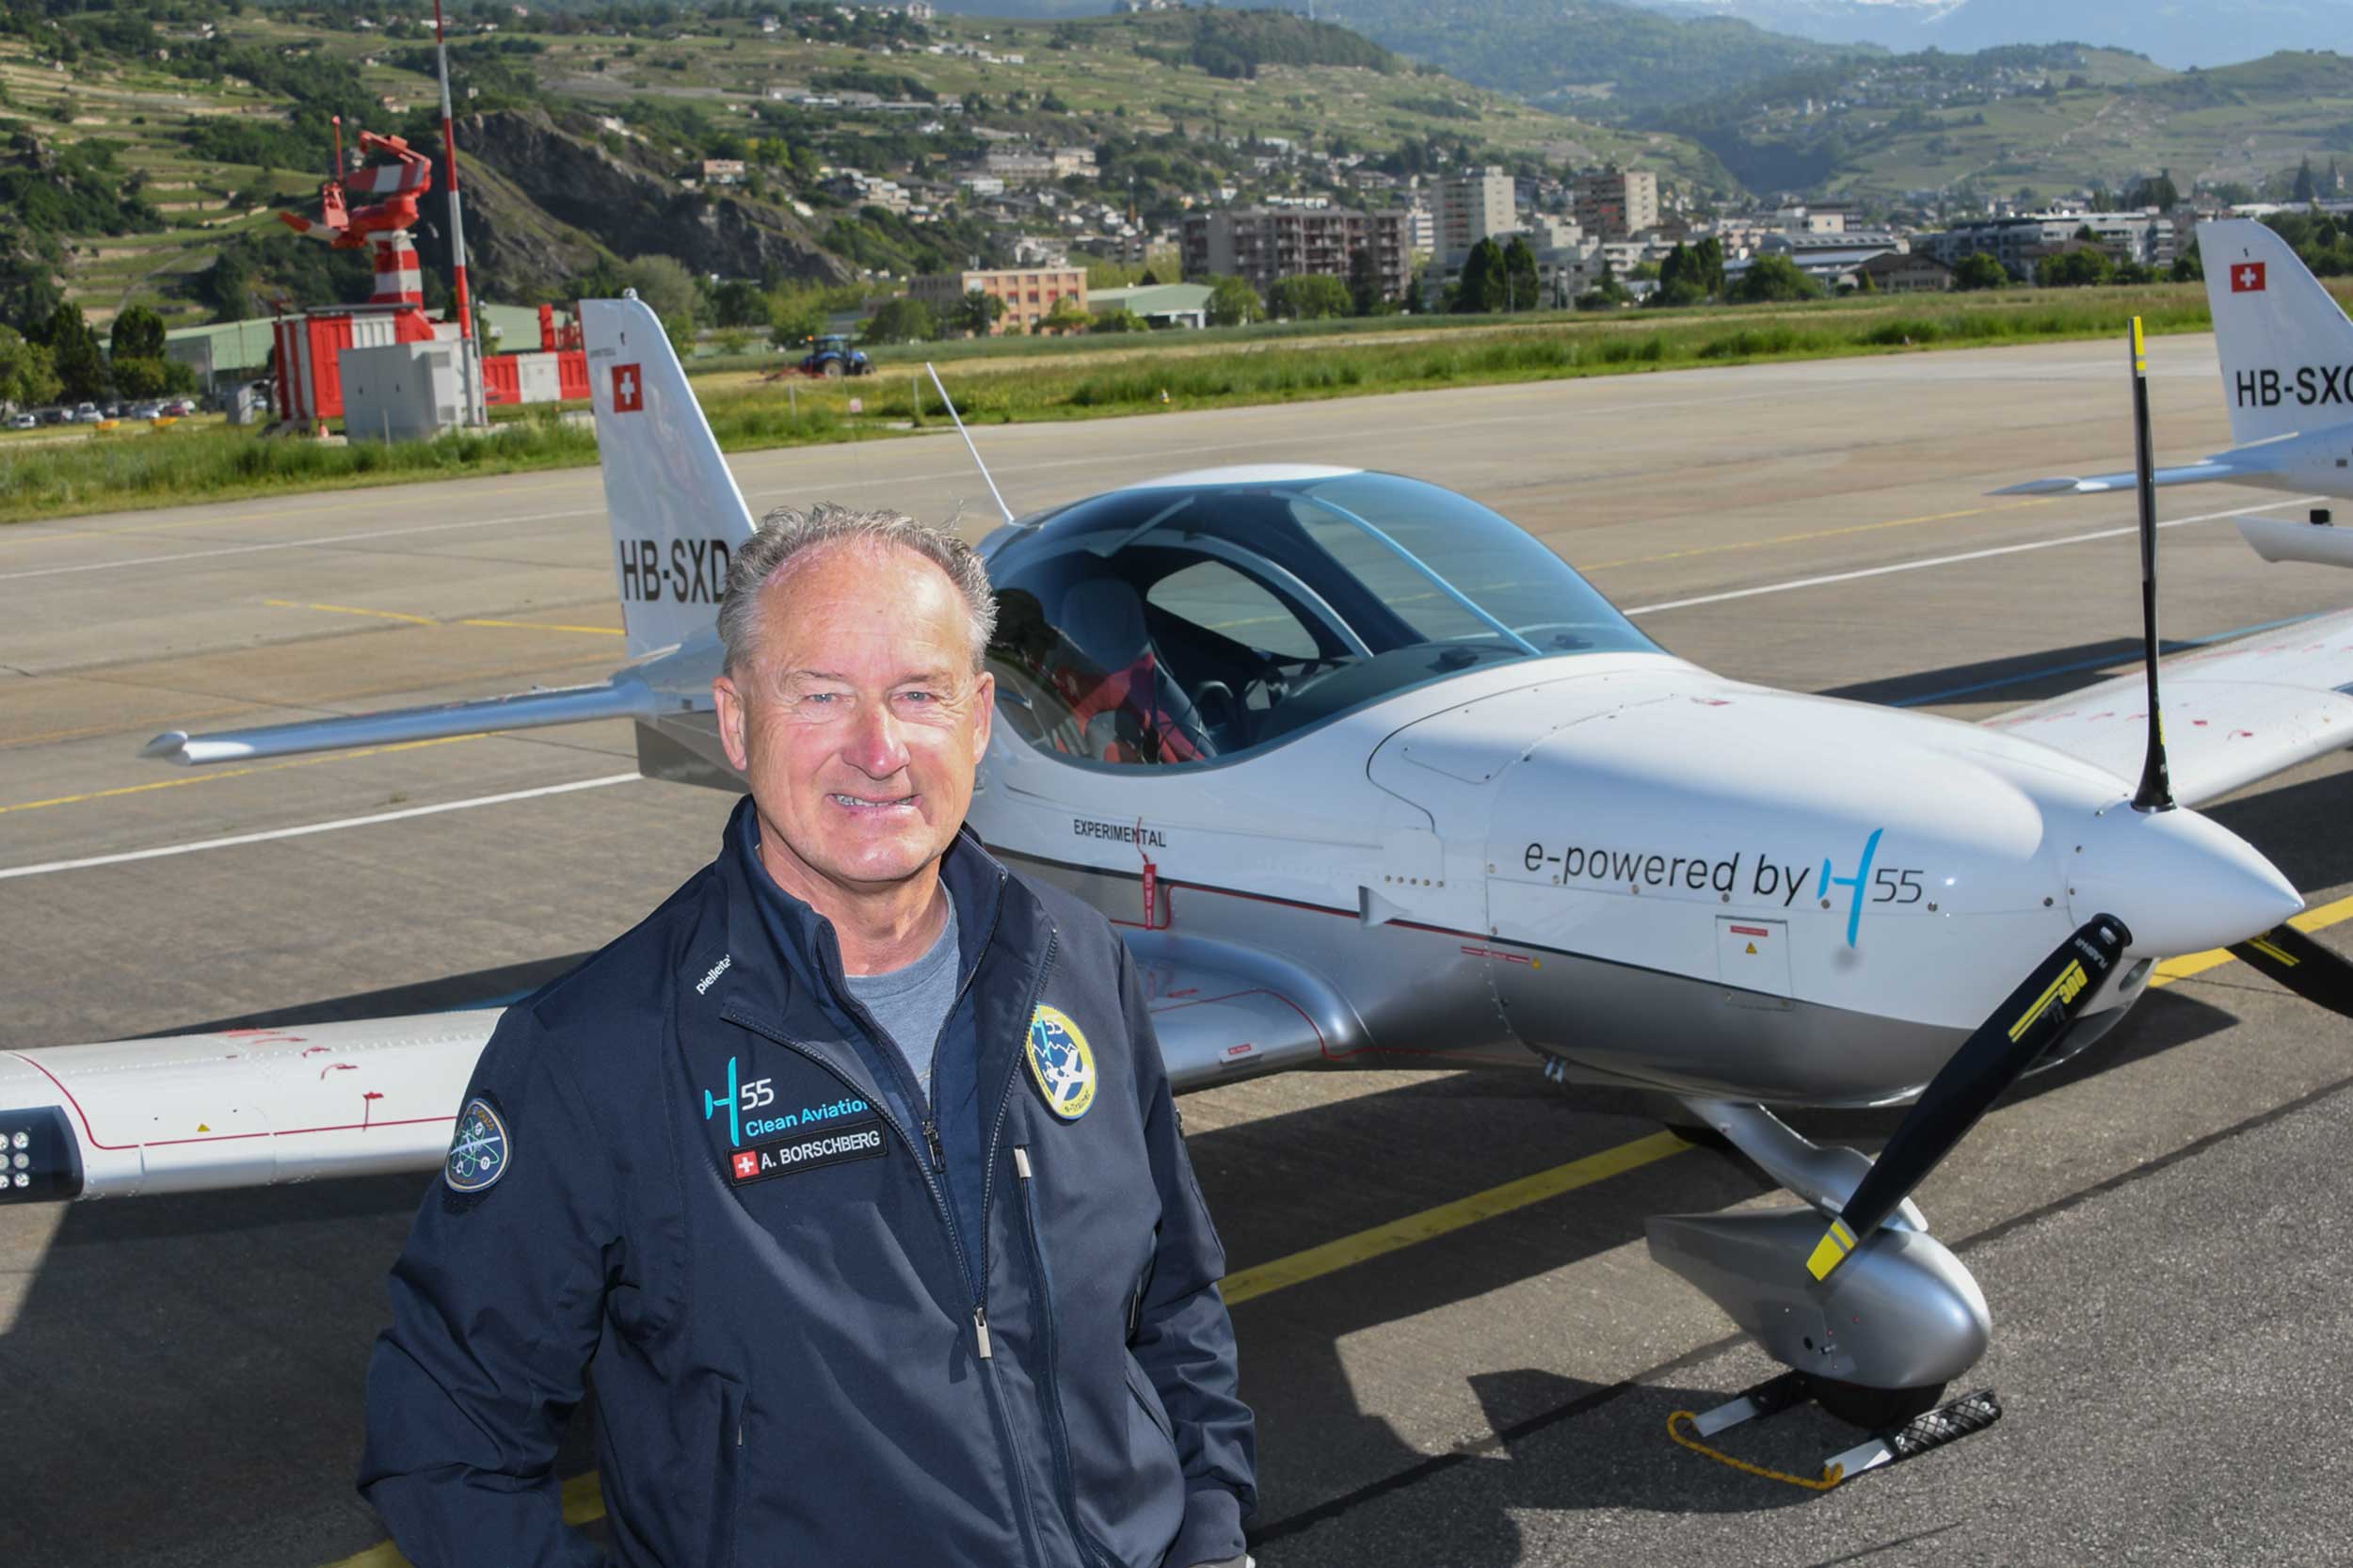 Solar Impulse pilot Andre Borschberg is one of the team behind H55